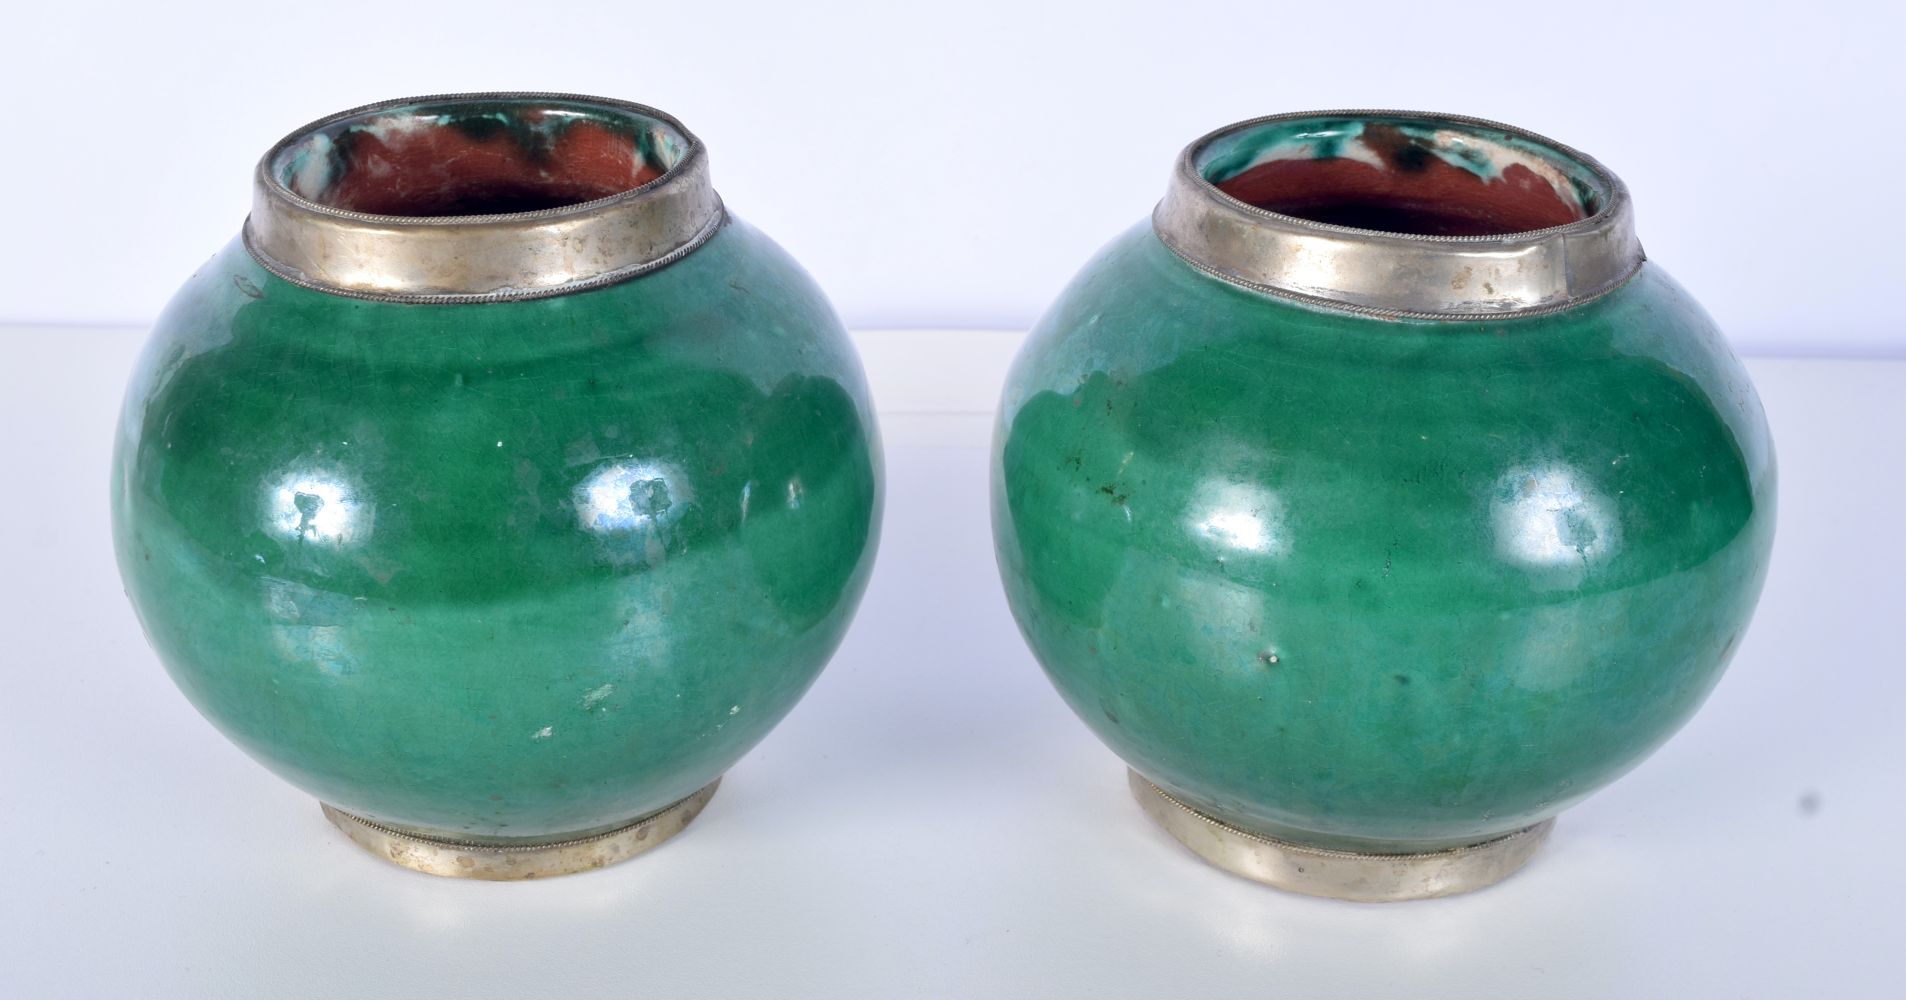 A pair of glazed terracotta jars with white metal mounts 13 x 13cm.